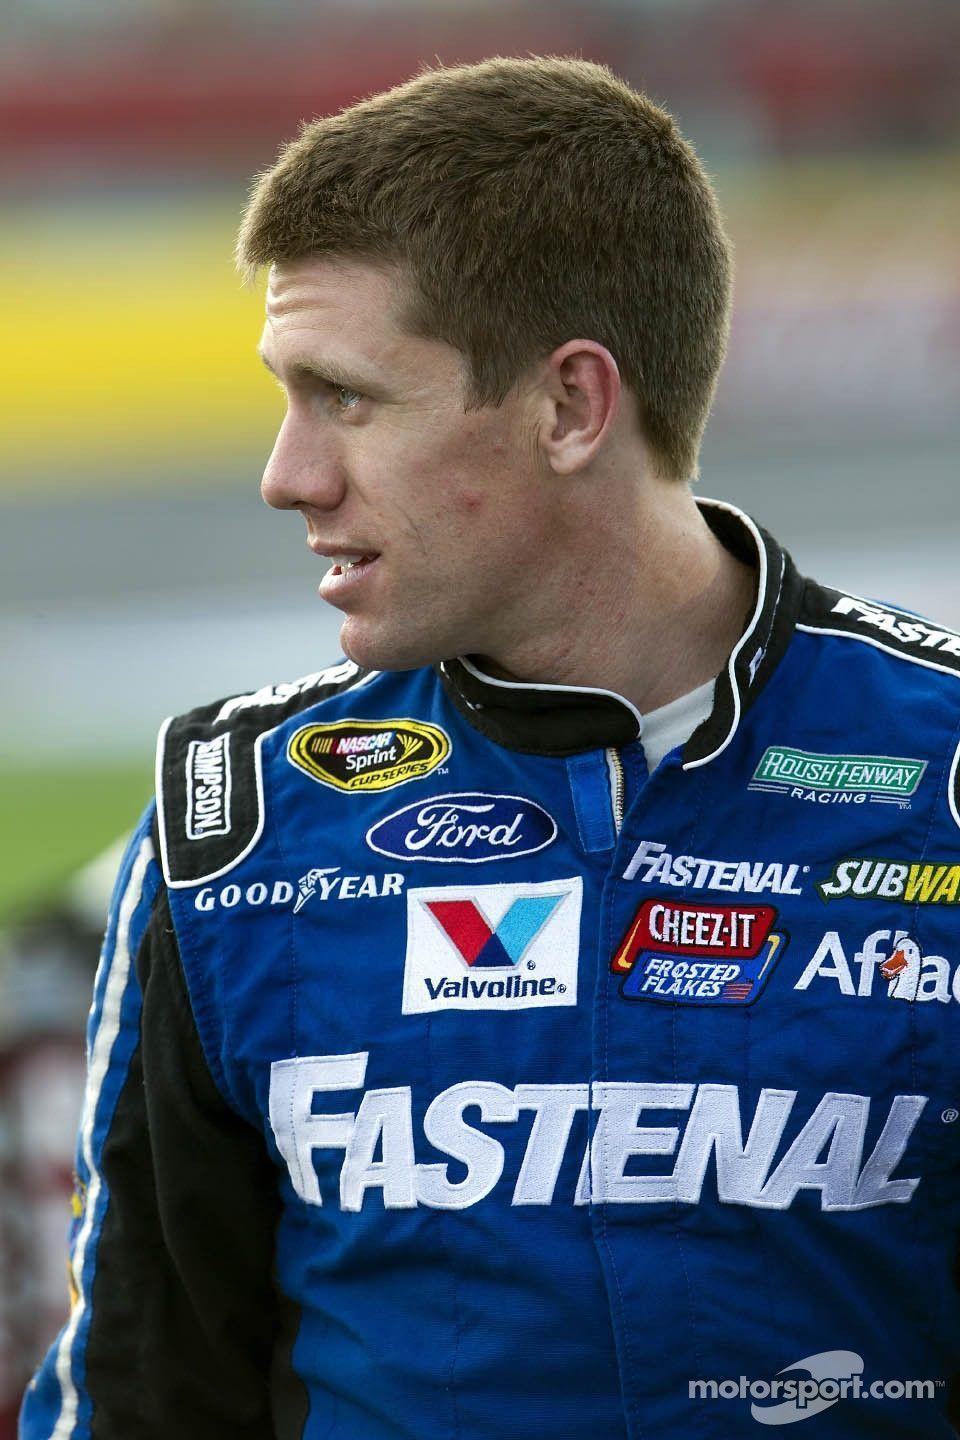 Source Url Smscs Photo Free Carl Edwards Wallpaper 4 Car Picture